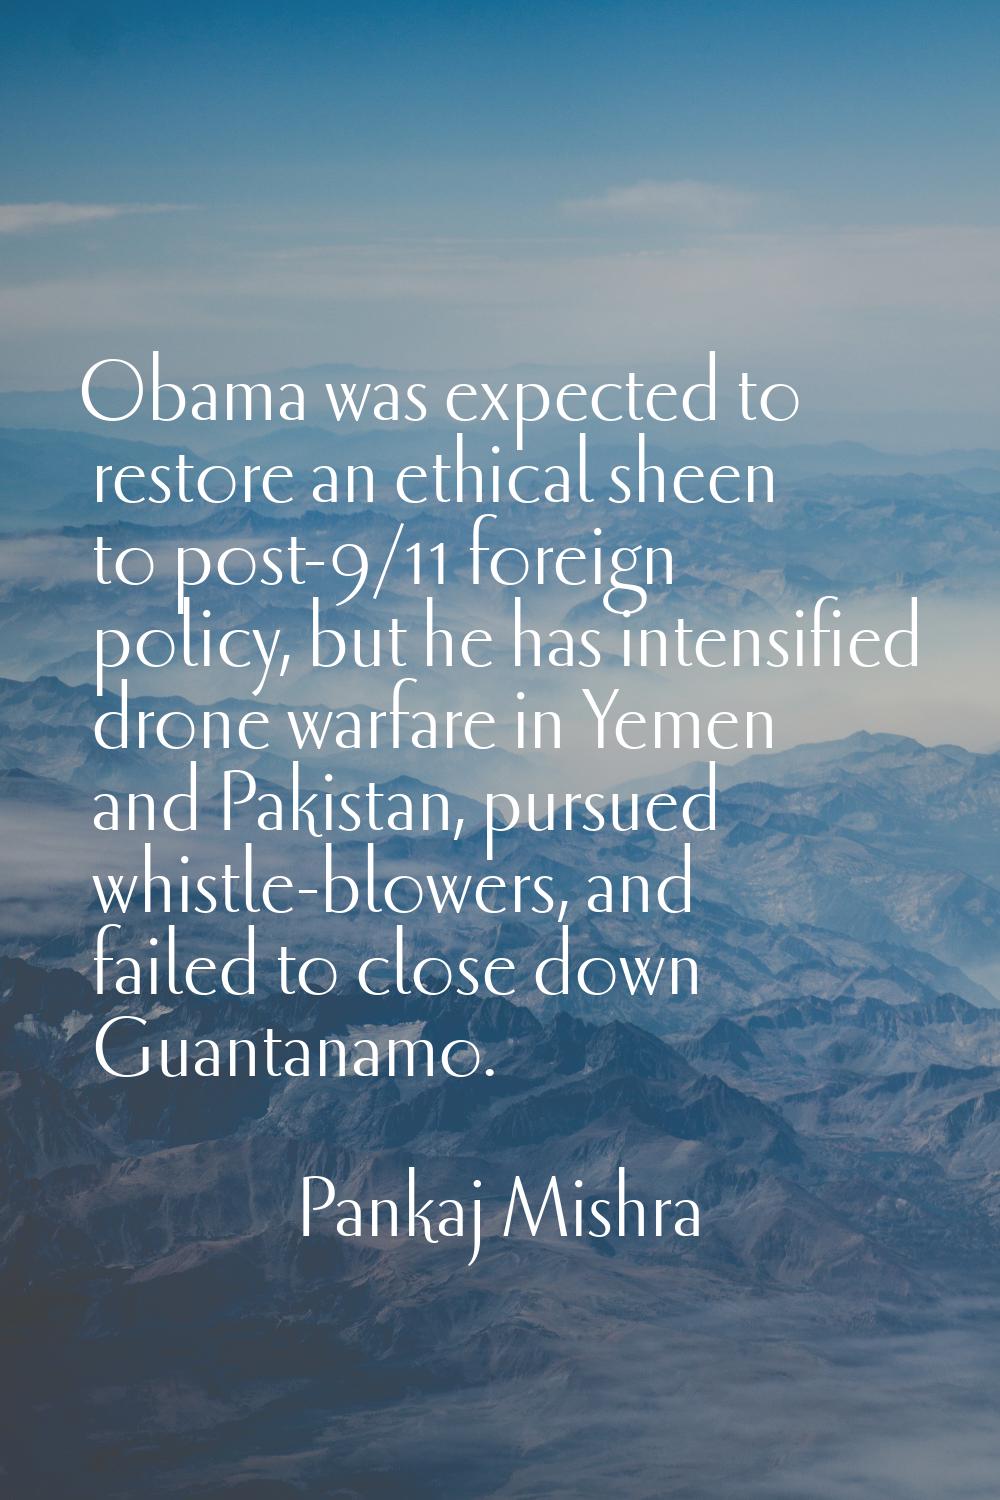 Obama was expected to restore an ethical sheen to post-9/11 foreign policy, but he has intensified 